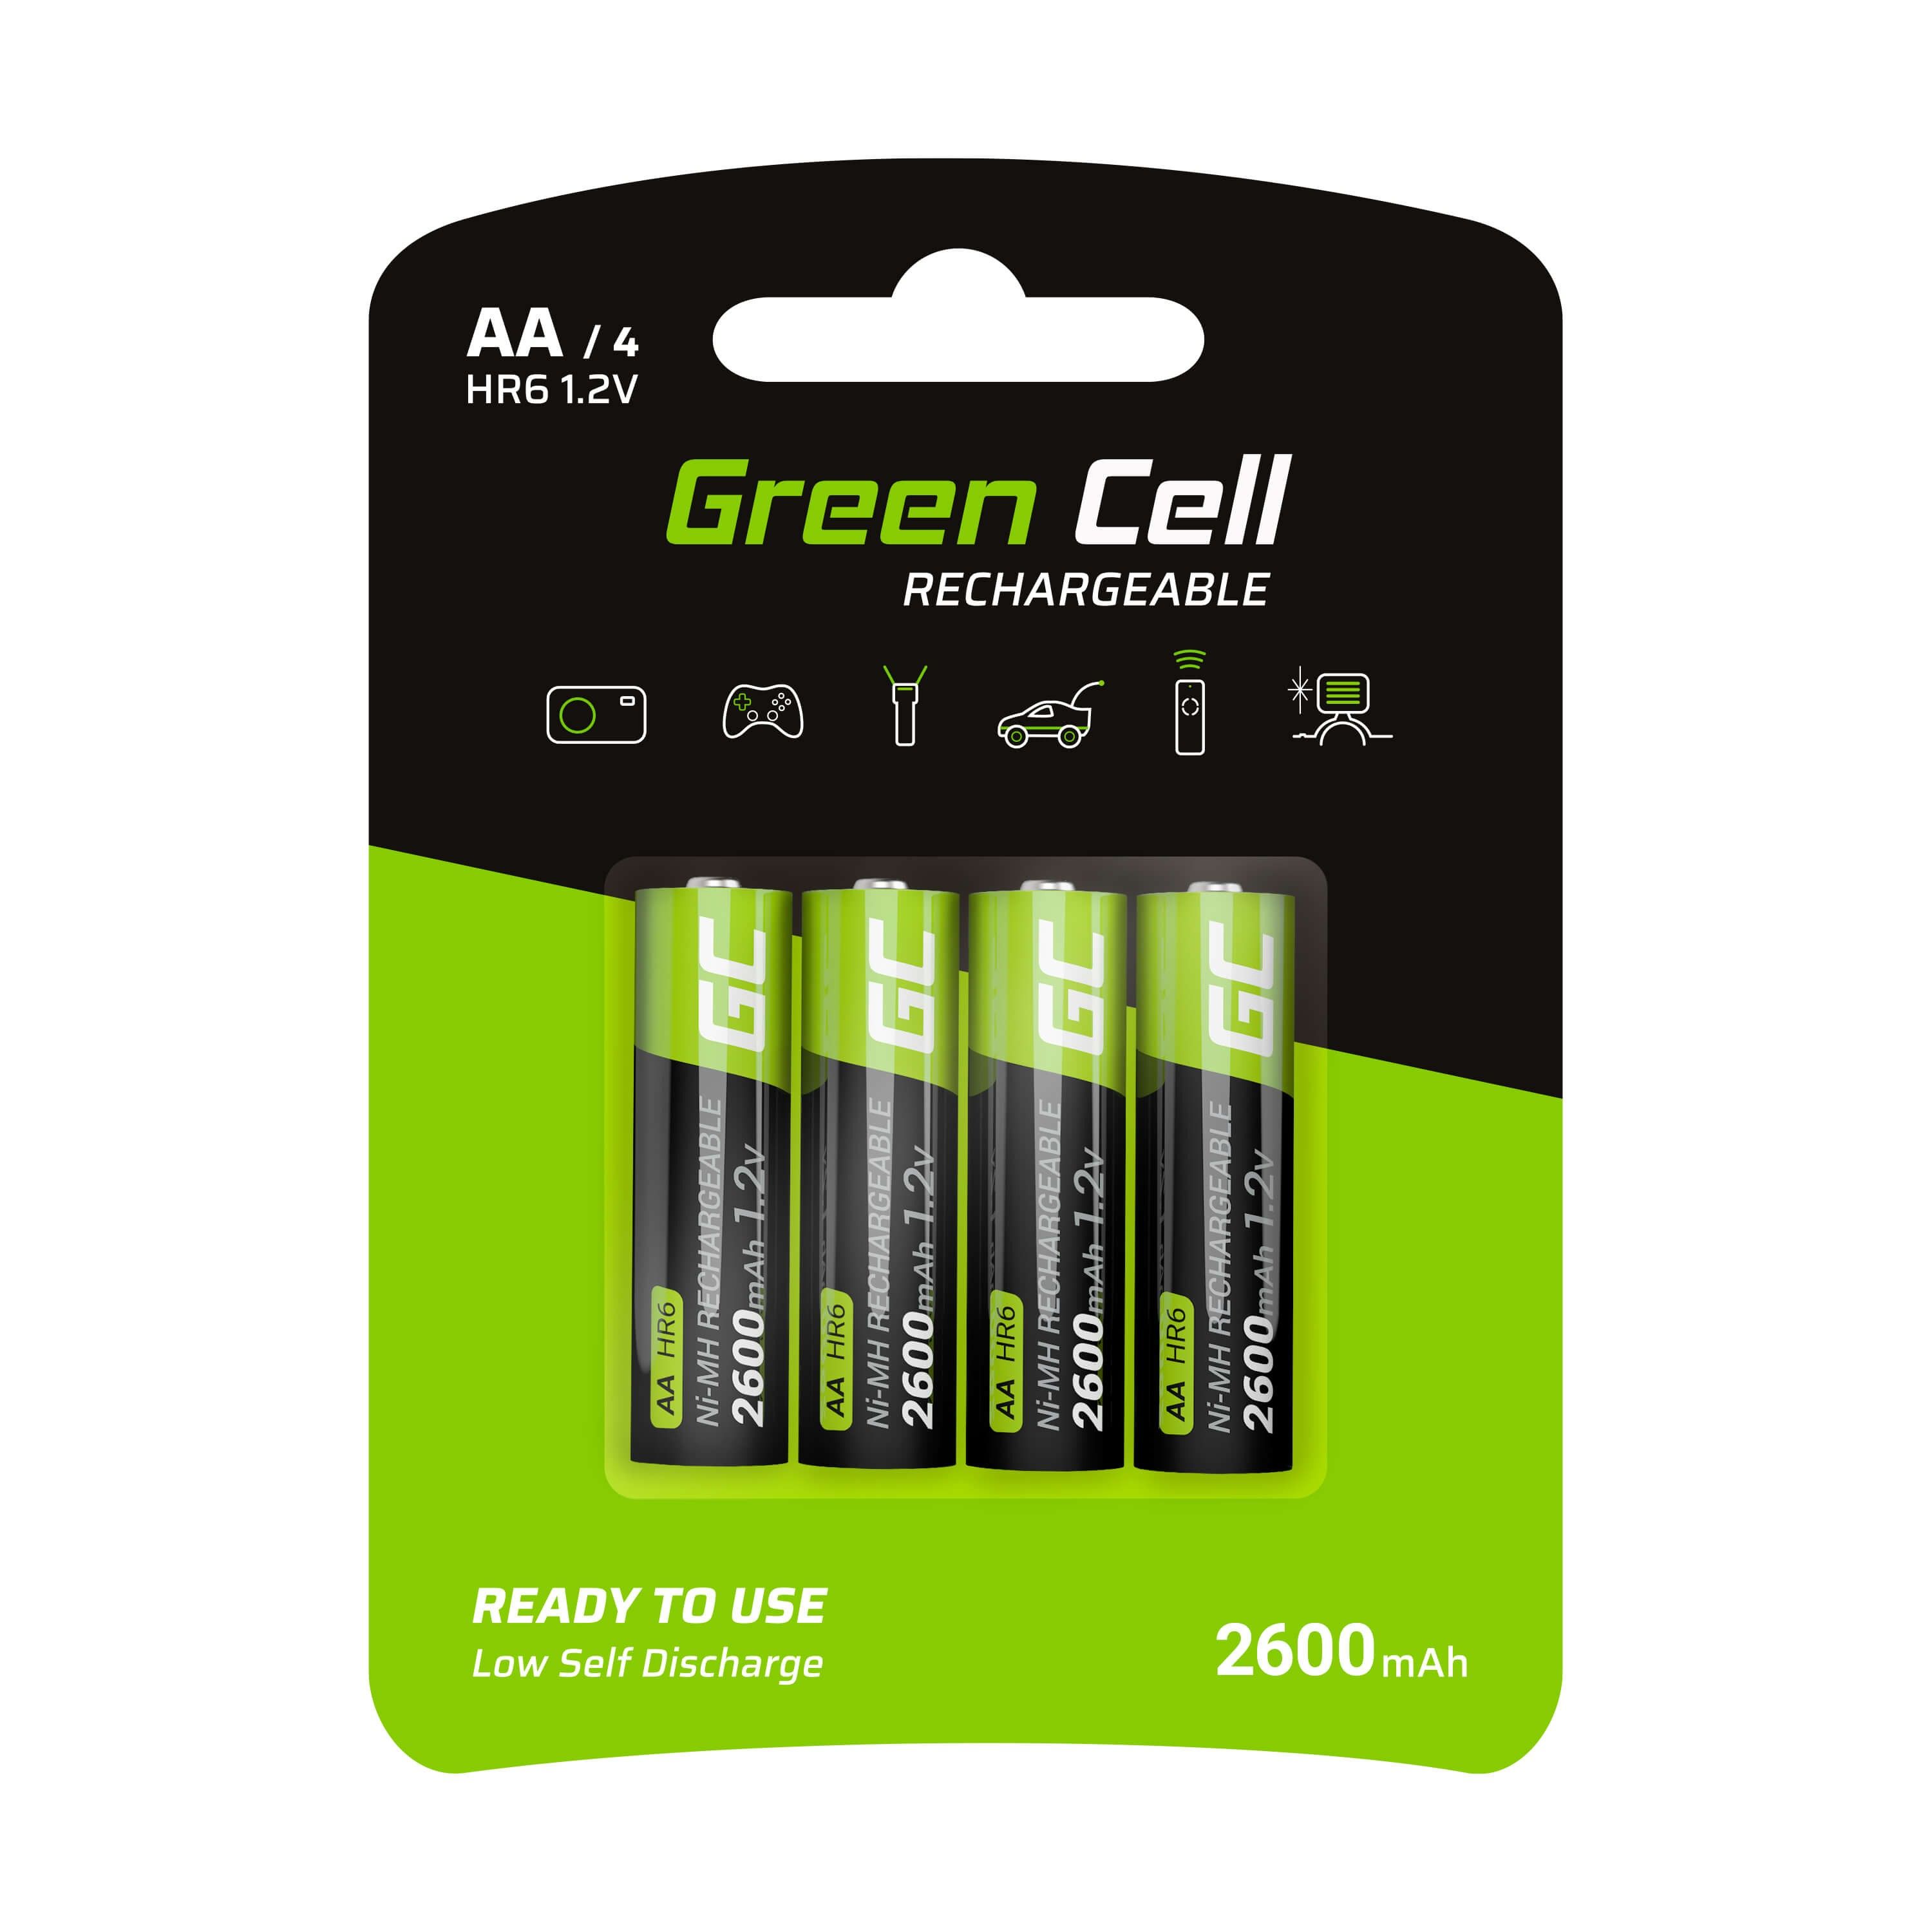 Green Cell GR01 household battery Rechargeable battery AA Nickel-Metal Hydride (NiMH) 4X AA R6 2600MAH_1